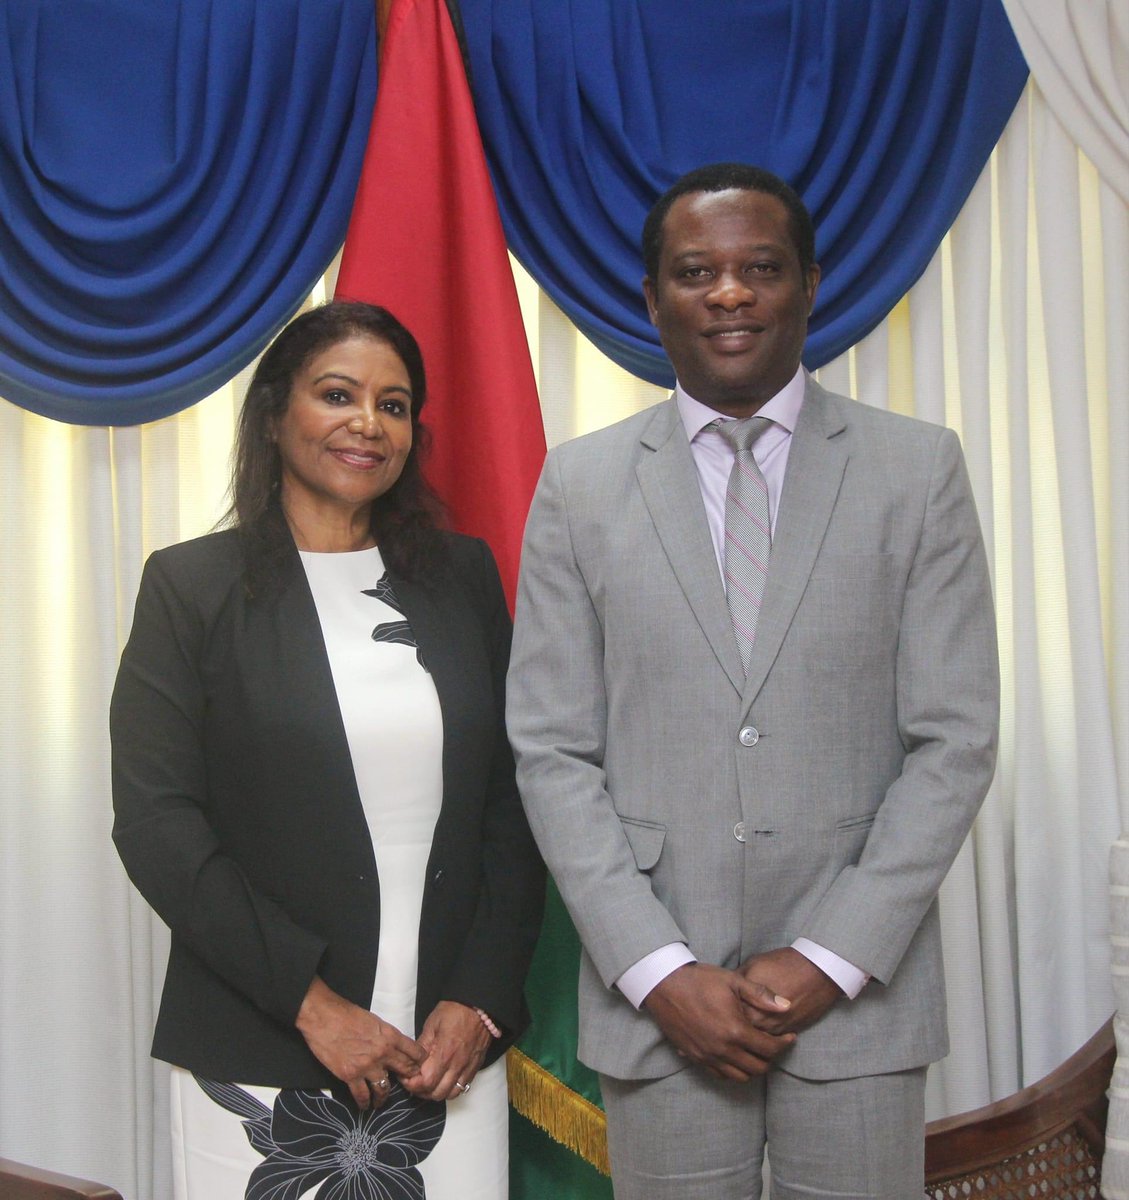 The Hon. Hugh Hilton Todd, Minister of Foreign Affairs and International Cooperation received a courtesy call from from Guyanese-born Judge Andrea Sabita Ogle, who was recently elected Judge of the Civil Court of the City of New York, Queens County, United States of America.